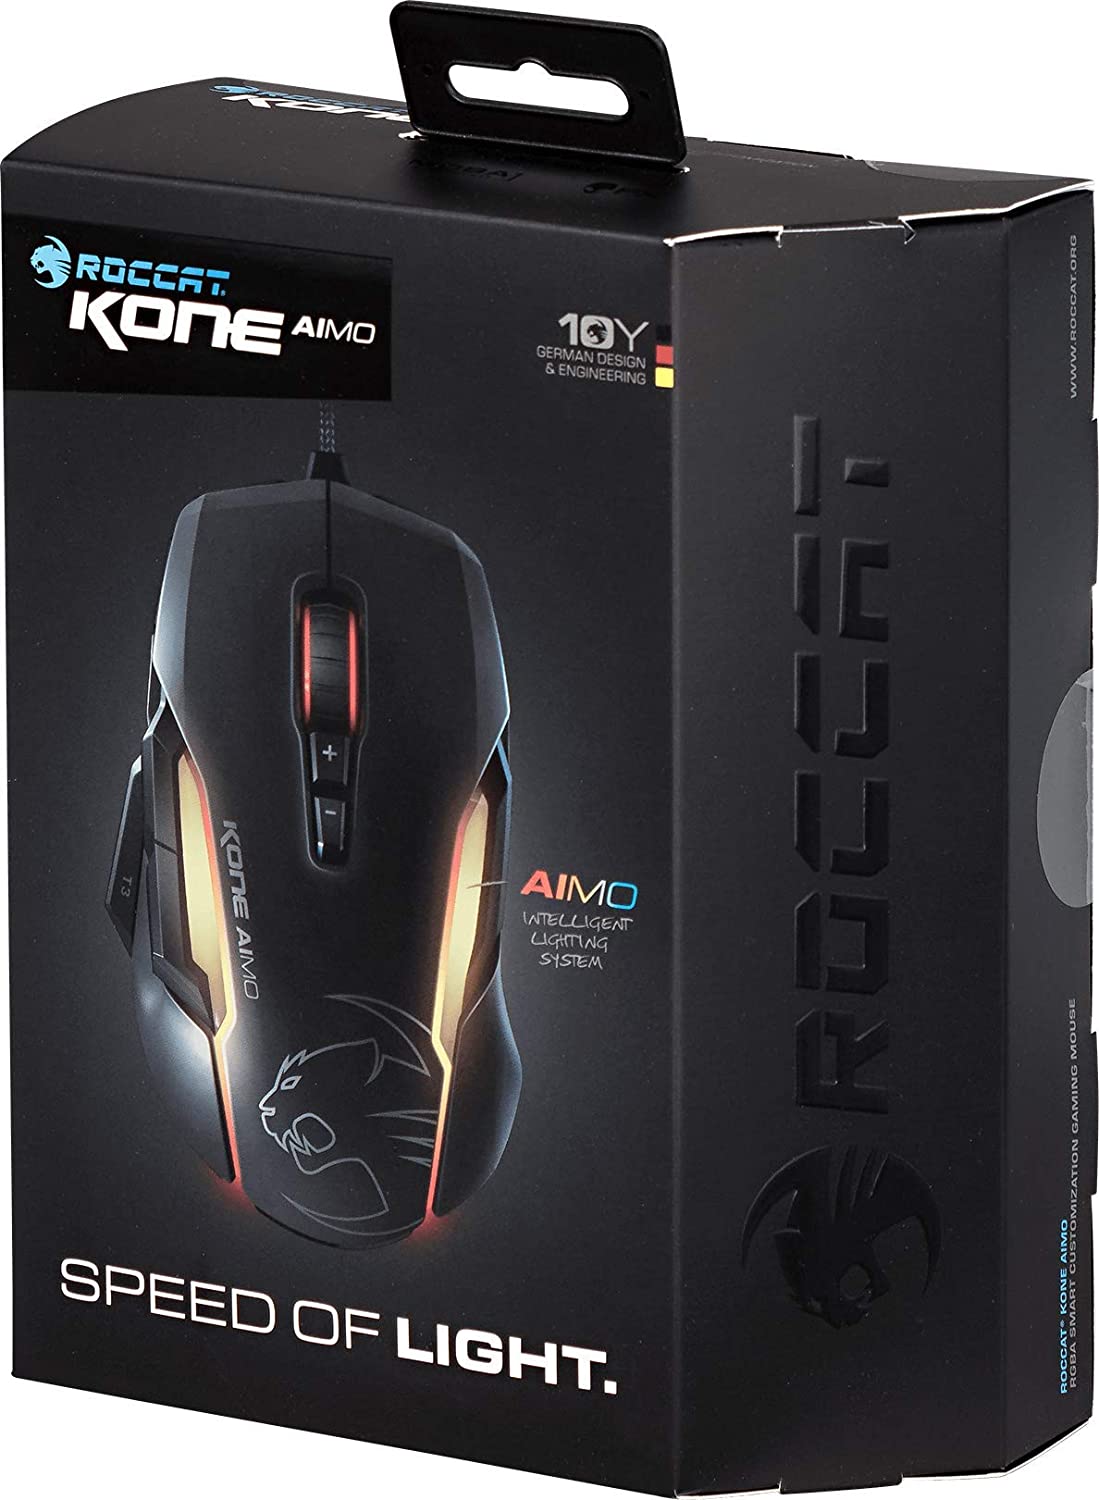 71Qr9Iq65Hl. Ac Sl1500 Roccat Https://Youtu.be/Mfk3Bmiiu8C Roccat® Swarm Powered – Comprehensive Driver Suite With A Striking Design And A Stunning Feature Set, The Kone Aimo Channels The Legacy Of Its Predecessor. It Boasts Refined Ergonomics With Enhanced Button Distinction, But What Truly Sets It Apart Is Its Rgba Double Lightguides Powered By The State-Of-The-Art Aimo Intelligent Lighting System. Aimo Is The Vivid Illumination Eco-System From Roccat®. Its Functionality Grows Exponentially Based On The Number Of Aimo-Enabled Devices Connected. It Also Reacts Intuitively And Organically To Your Computing Behavior. Eliminating The Need For Configuration, It Presents A State-Of-The-Art Lighting Scenario Right Out Of The Box, For A Completely Fluid, Next-Gen Experience. The Kone Aimo Features A Tri-Button Thumb Zone For A New And Even Greater Level Of Control. It Includes Two Wide Buttons Suitable For All Hand Sizes, Plus An Ergonomic Lower Button Set To Easy-Shift[+]™ By Default. Easy-Shift[+]™ Is The World-Famous Button Duplicator Technology That Lets You Assign A Secondary Function To The Mouse'S Buttons. It'S Easy To Program And Has Options For Simple Commands And Complex Macros. Roccat Roccat - Kone Aimo Rgba Smart Customization Gaming Mouse (Gray) 23 Programmable Keys, Designed In Germany